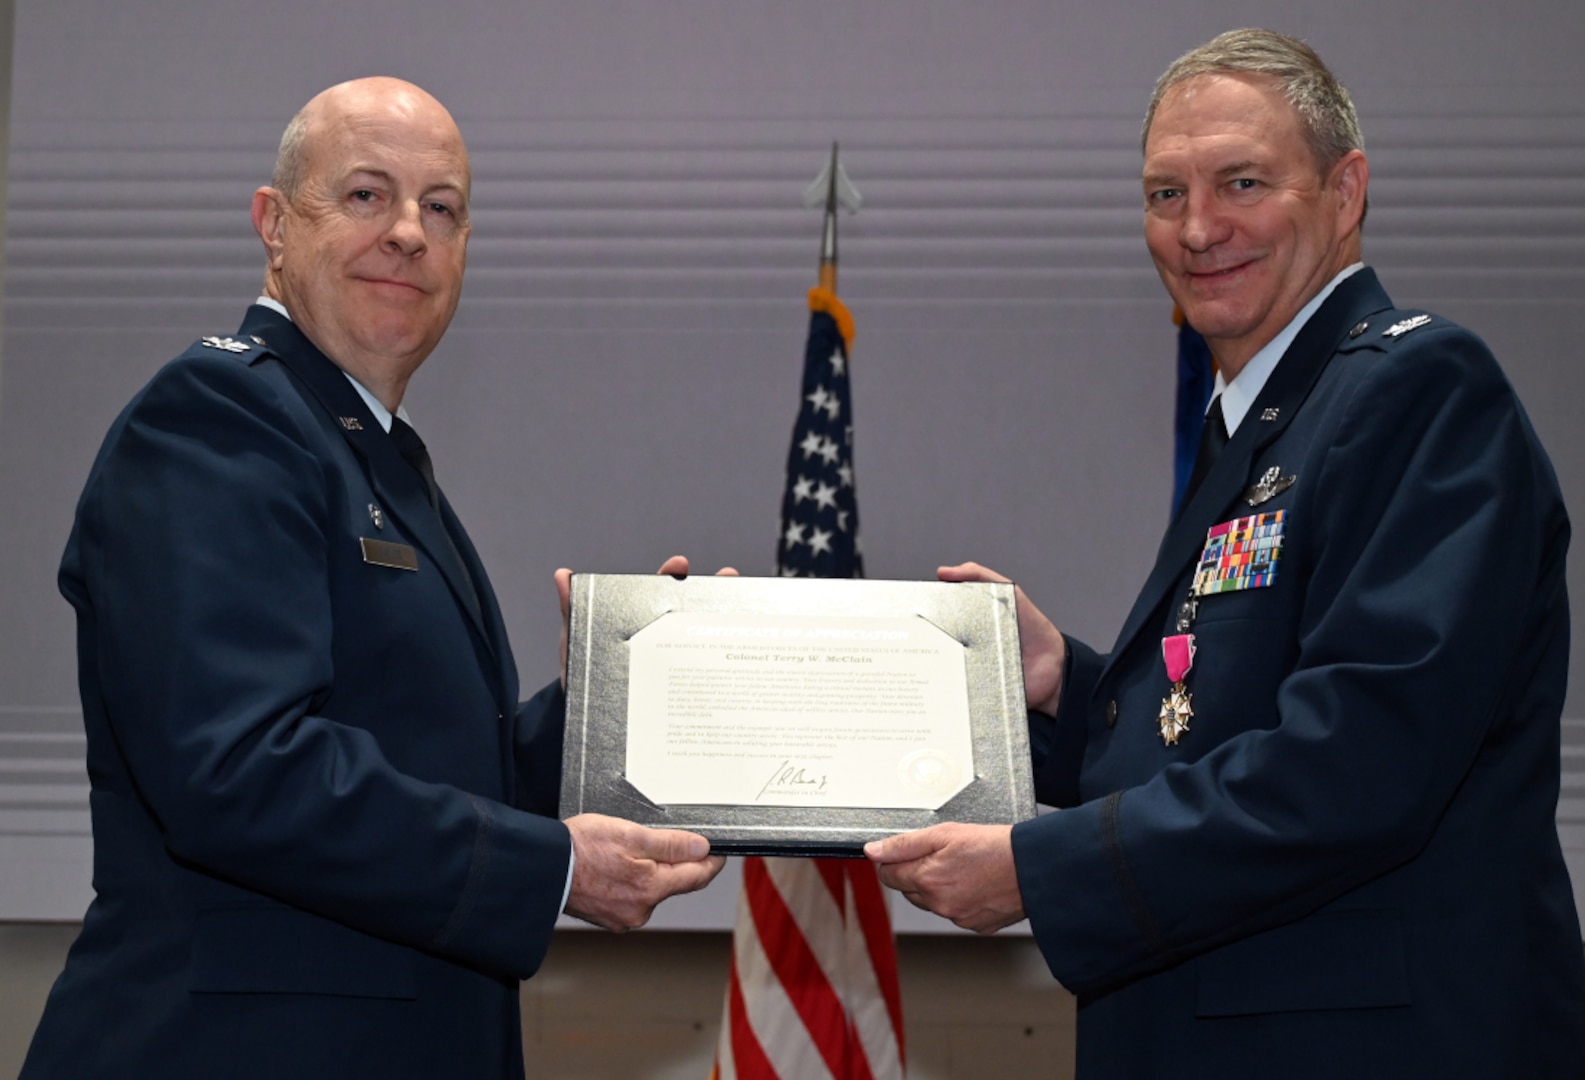 433rd Airlift Wing Commander Retires After 33 Years of Service